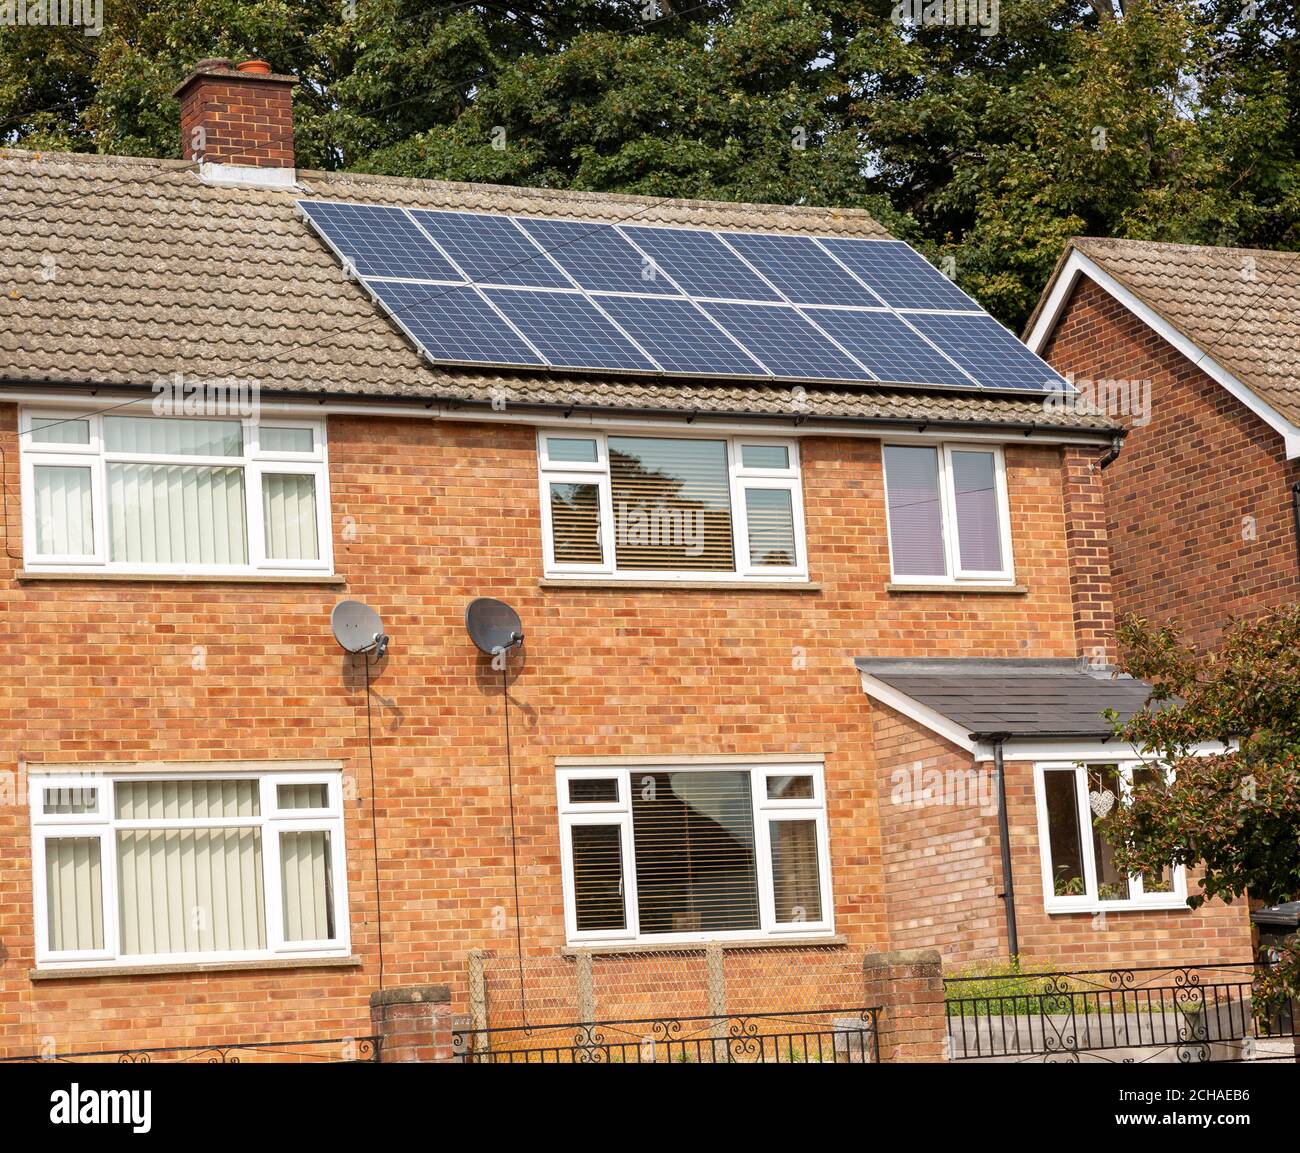 Solar panels of roof of semi-detached modern house in Ipswich, Suffolk, England, UK Stock Photo